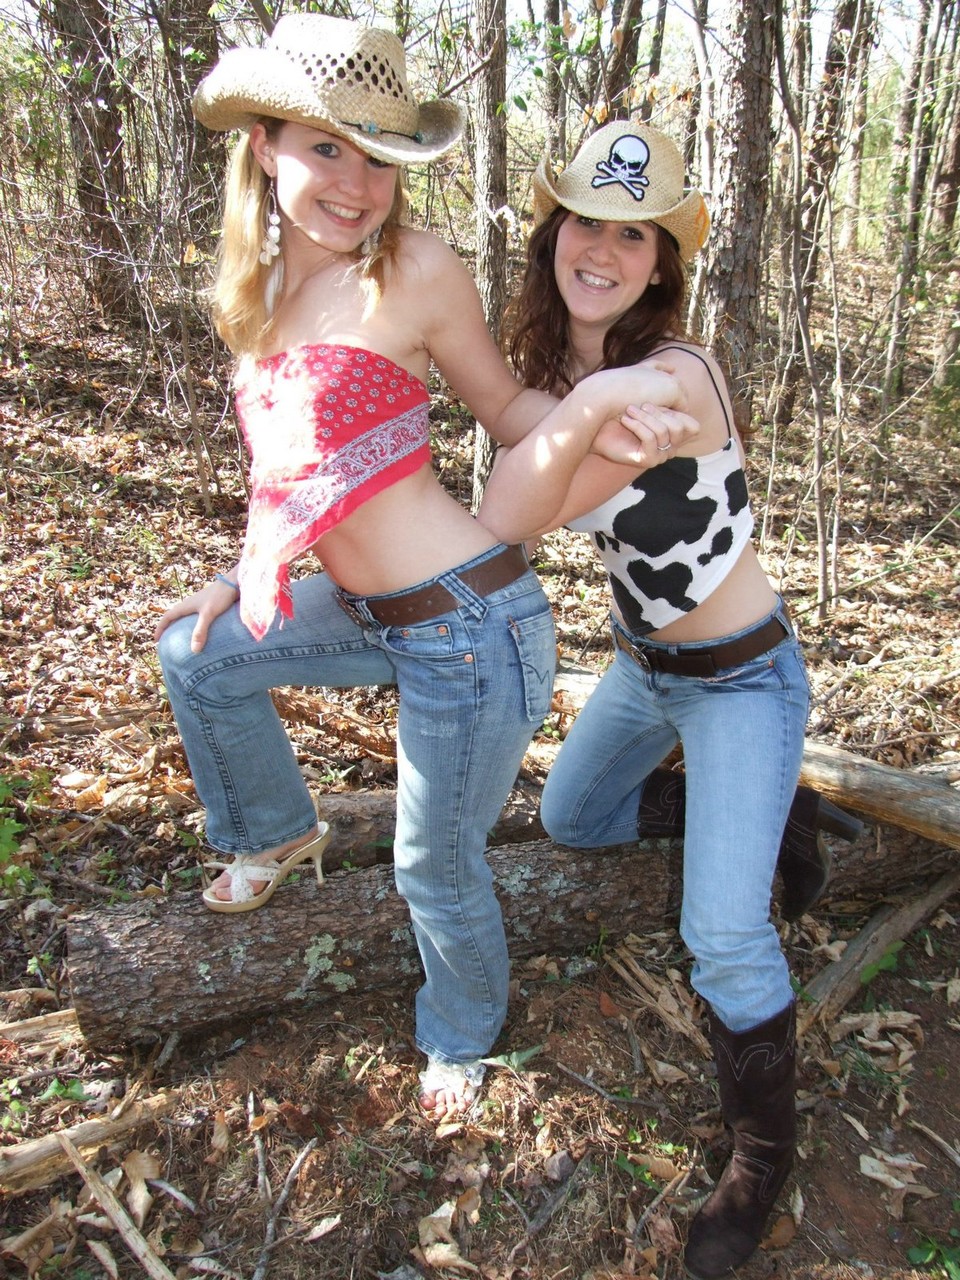 Cowgirl lesbians Kitty and Anna show their titties in the forest foto porno #427006705 | Teen Dreams Pics, Anna, Kitty, Jeans, porno ponsel